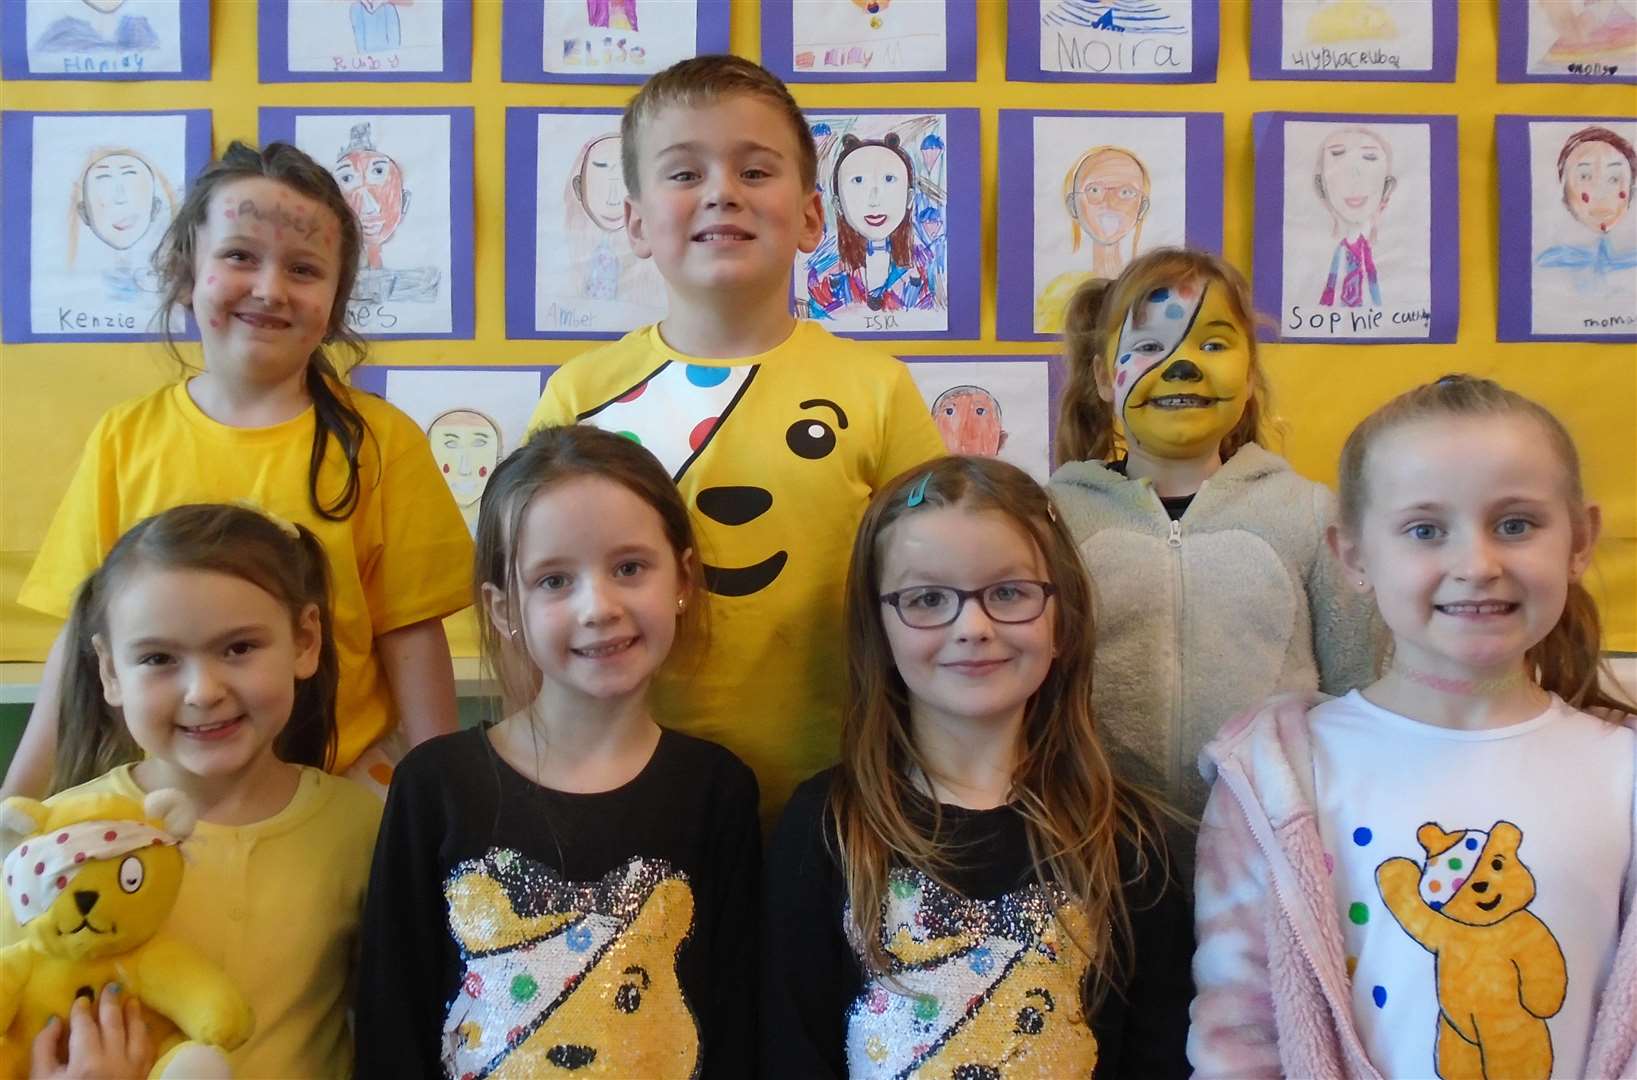 All smiles in yellow for Pudsey at Miller Academy!